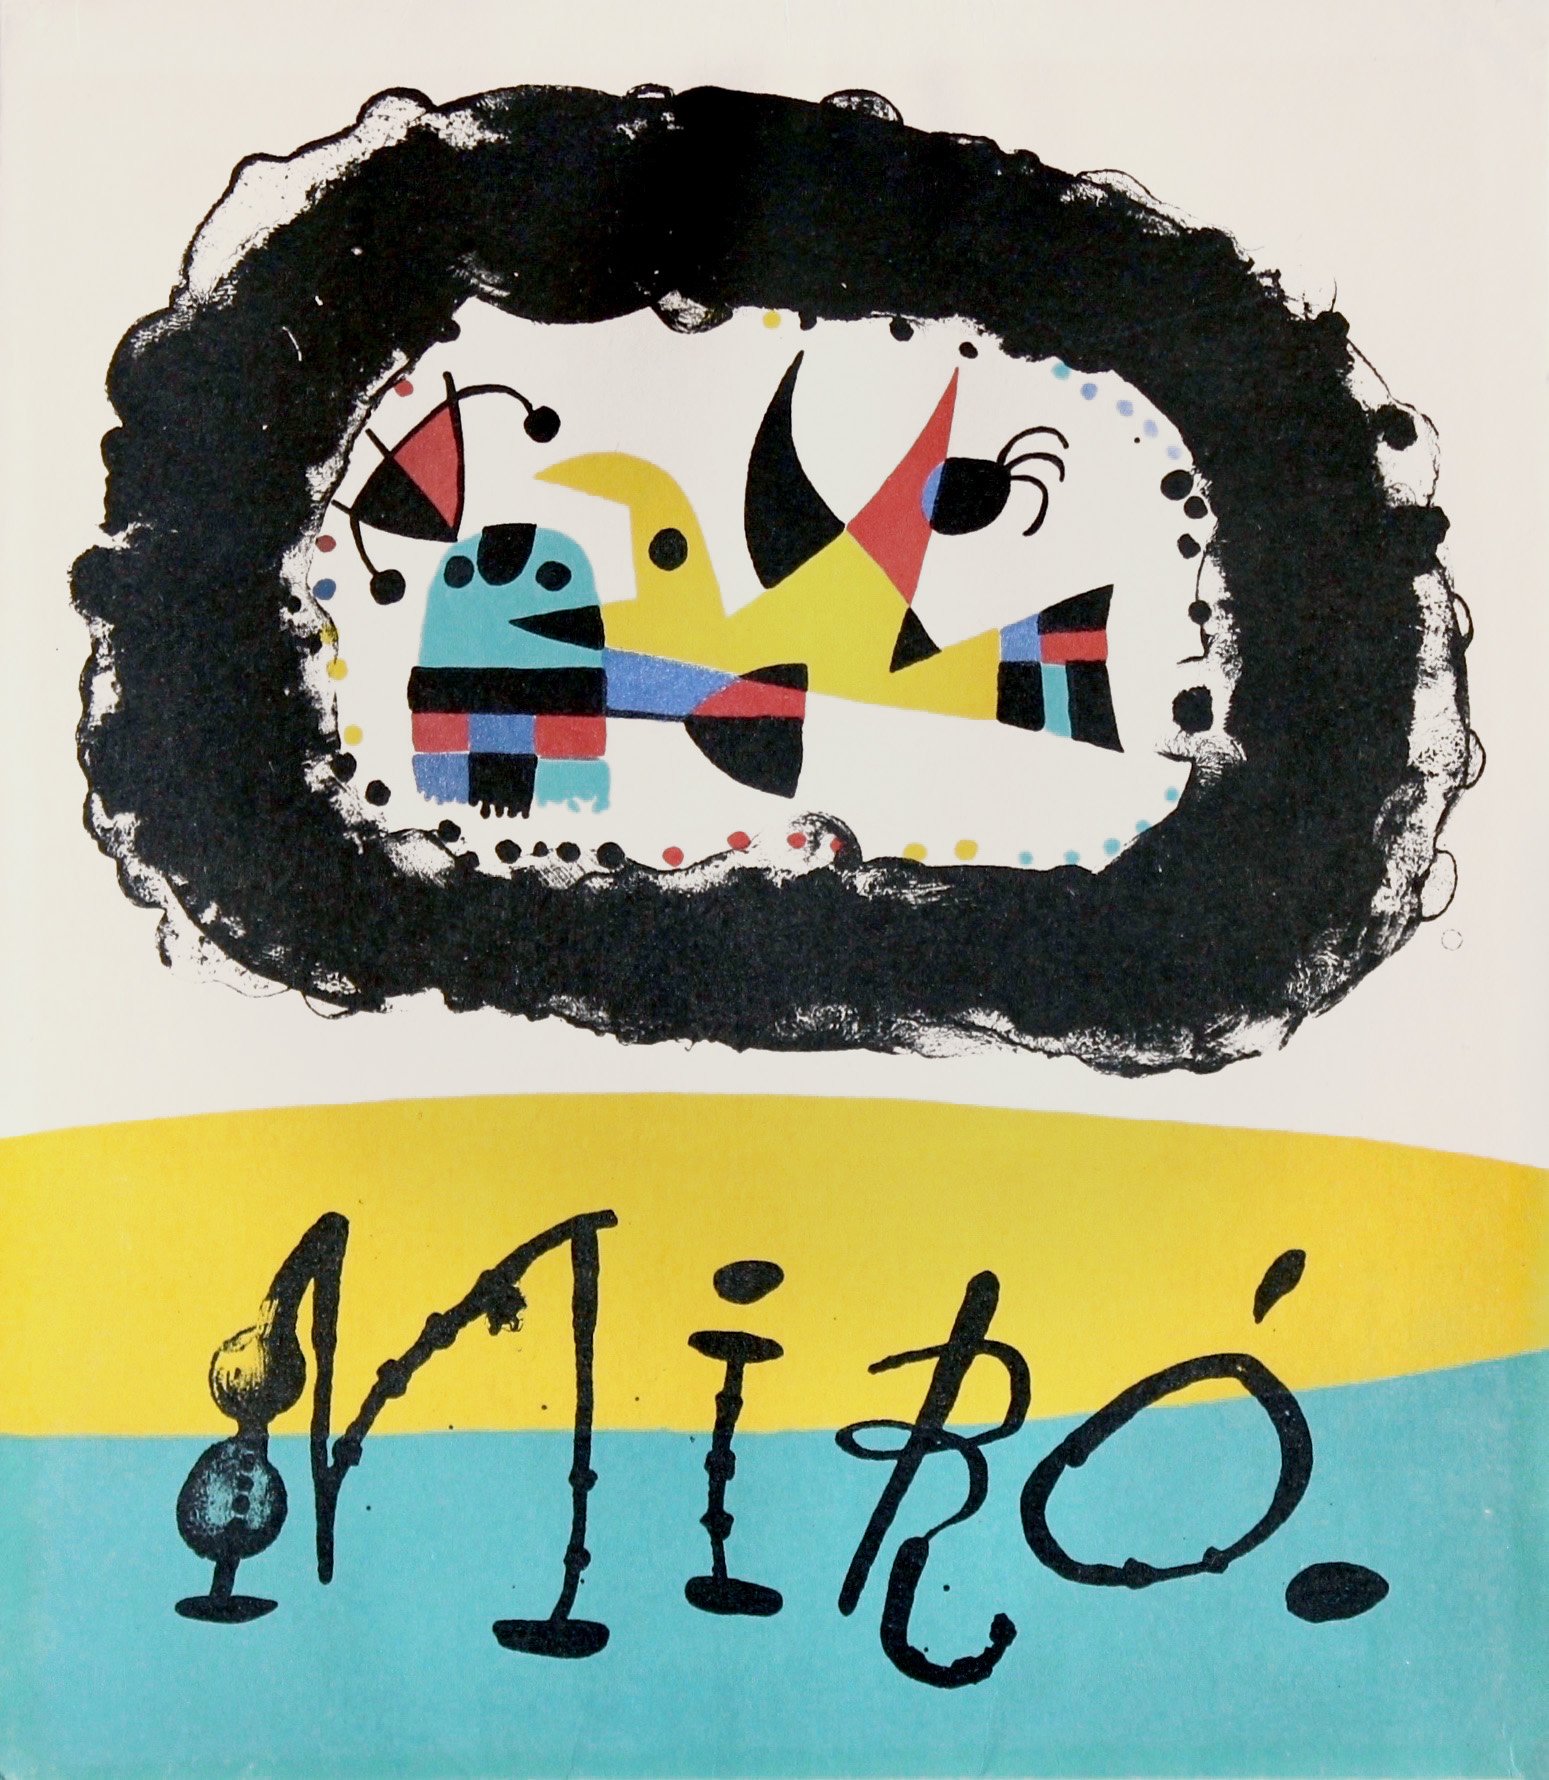   Joan Miro par Jacques Prevert, couverture.  Lithograph, 9 1/8" x 8." Edition 2200.     This piece was the front cover of "Joan Miro,” published by Maeght Editeur in 1956 and printed by Mourlot. 